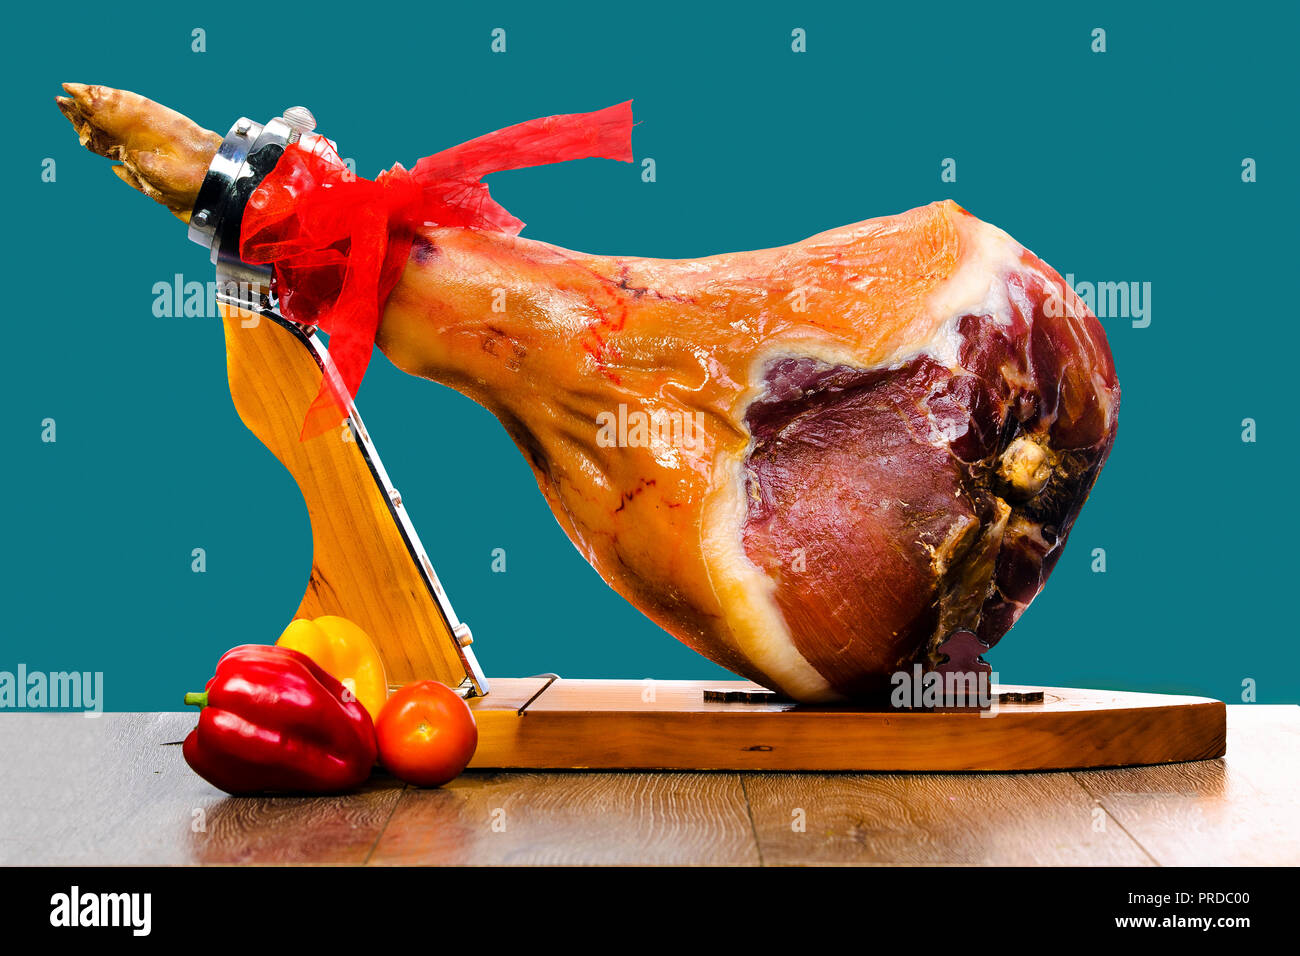 Parma ham (jamon) on a wooden stand isolated on blue background Stock Photo